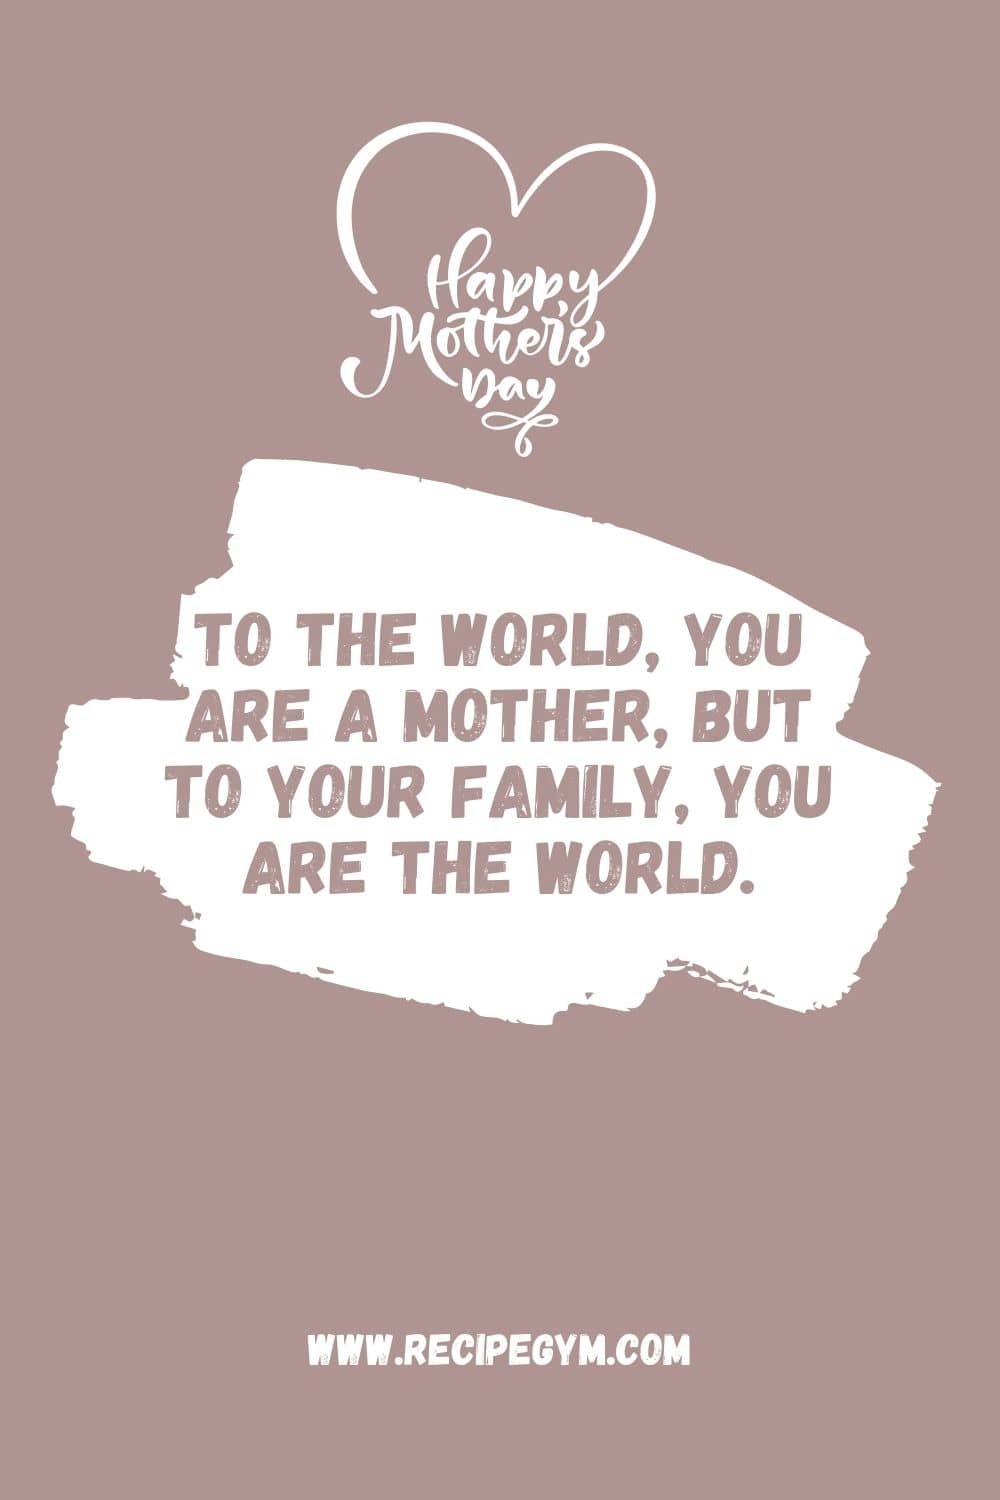 6g To the world you are a mother but to your family you are the world